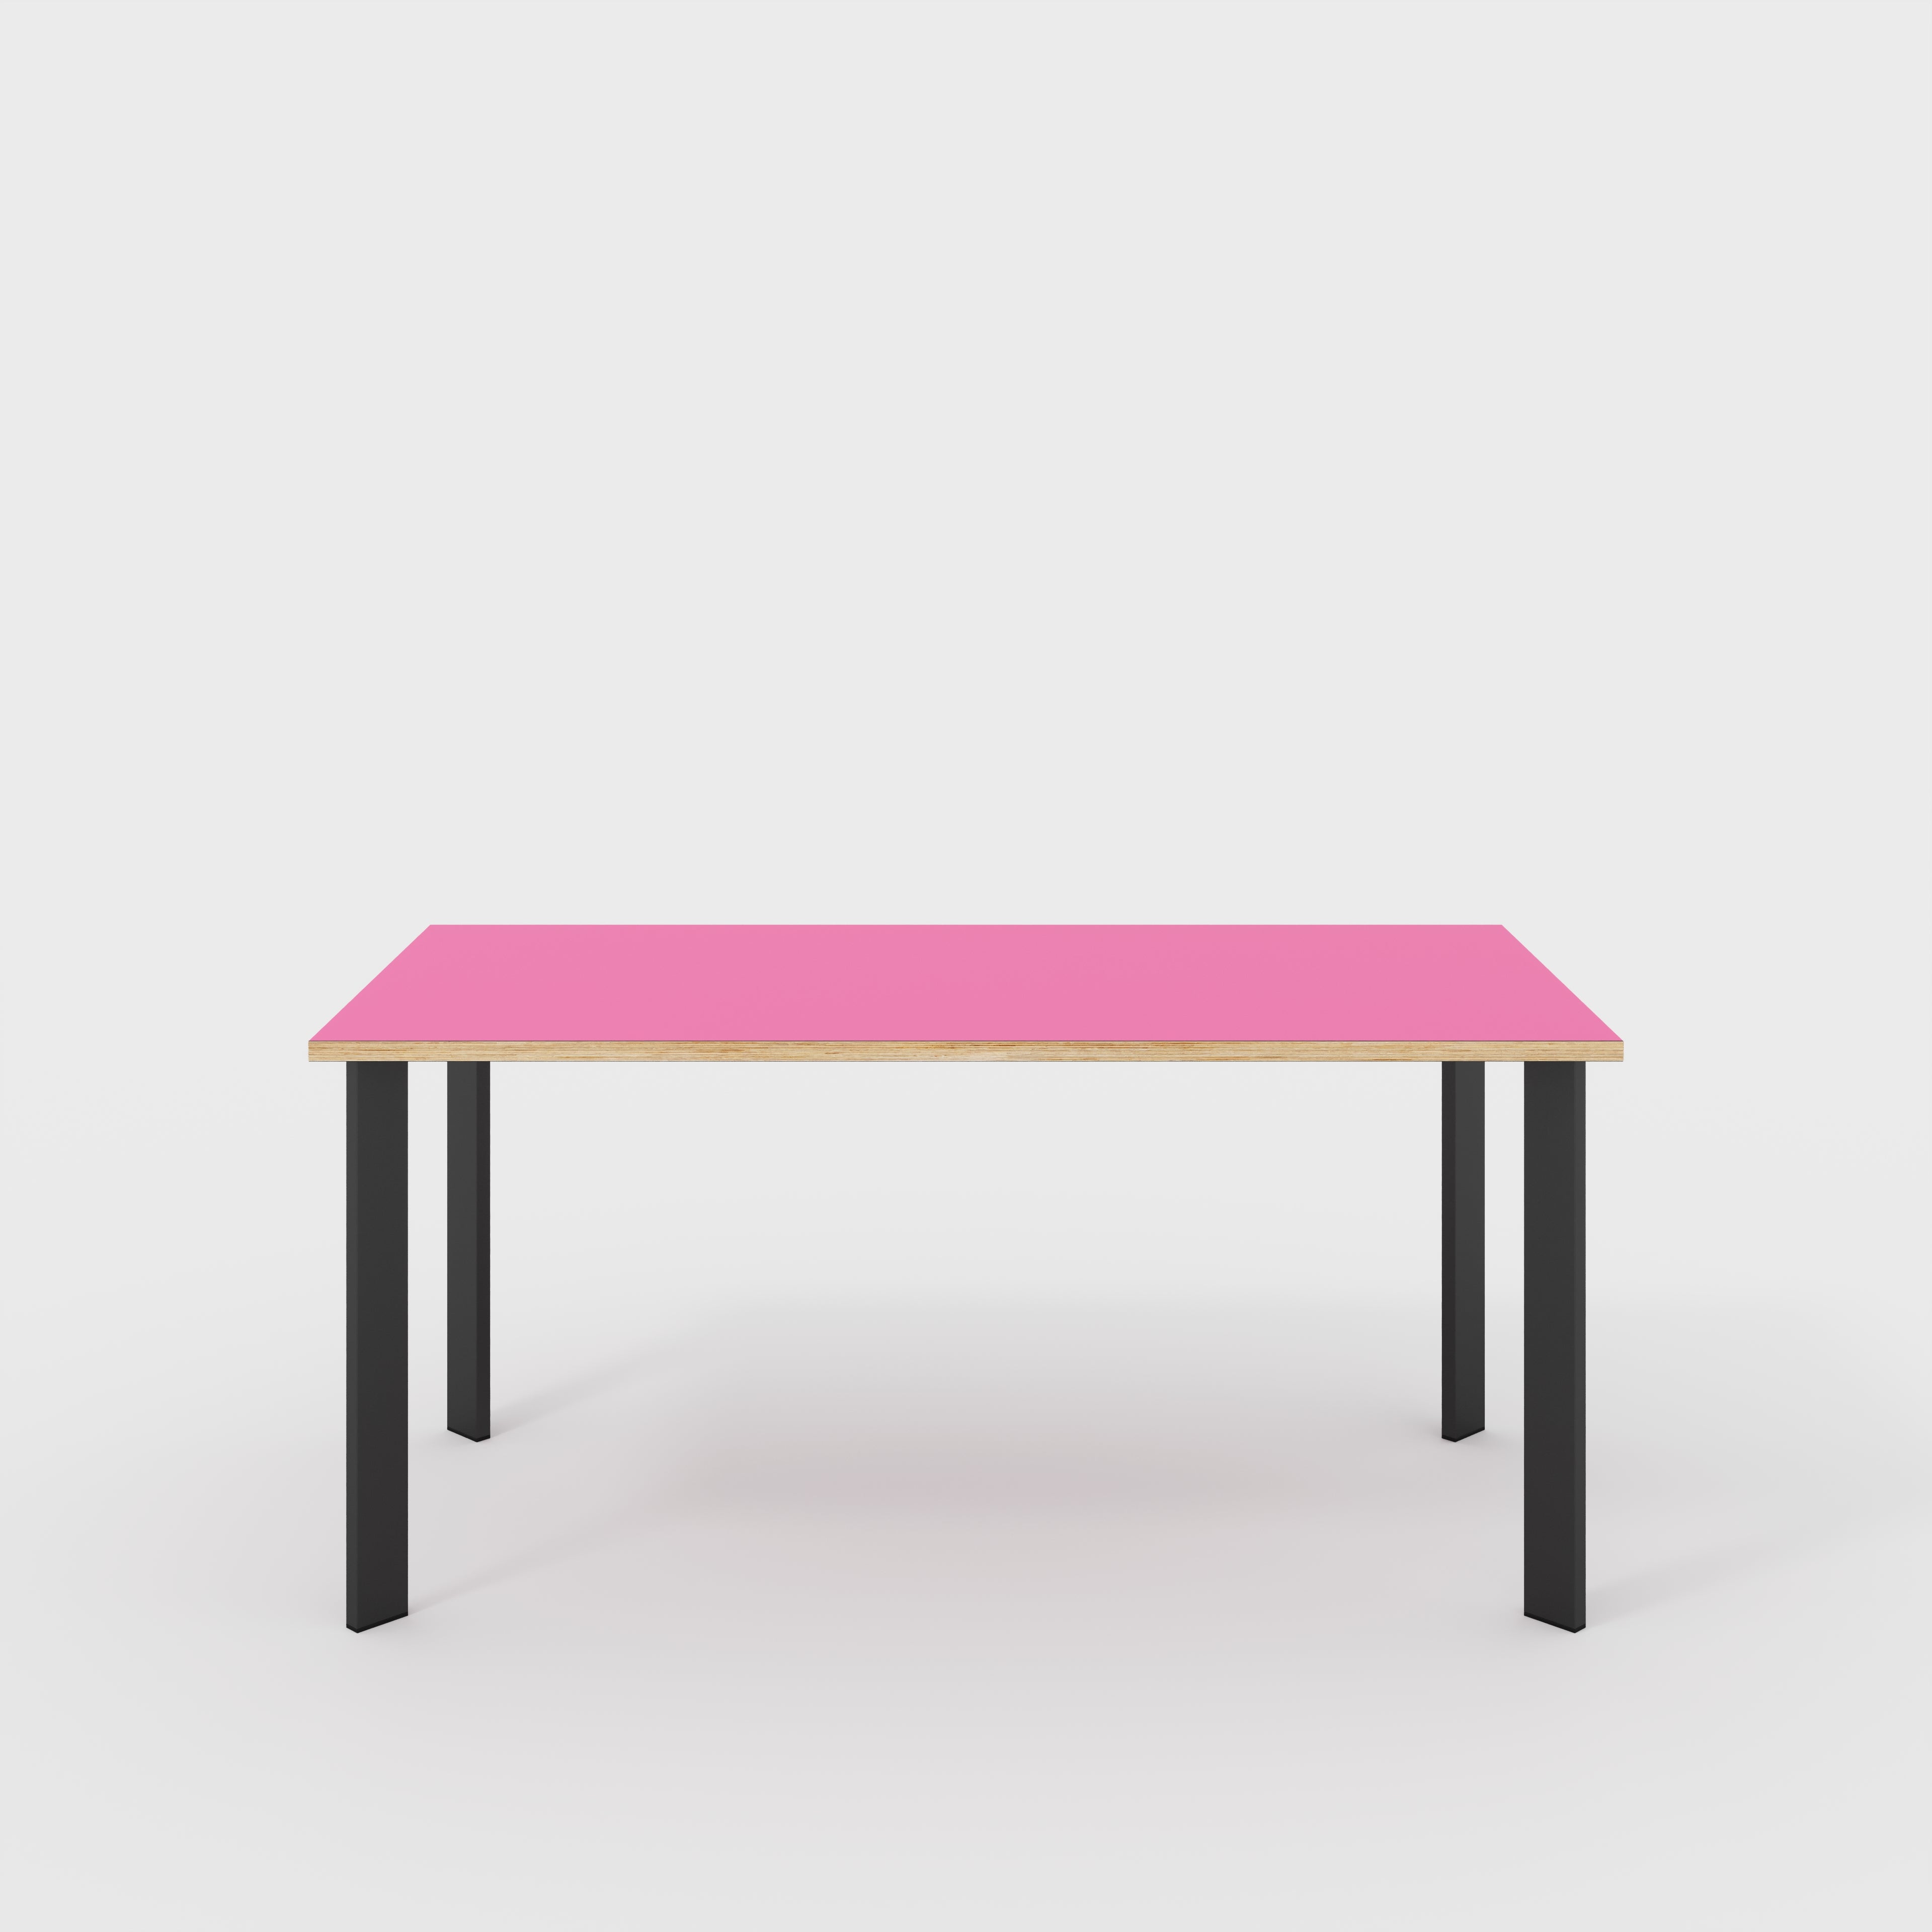 Table with Black Rectangular Single Pin Legs - Formica Juicy Pink - 1600(w) x 800(d) x 735(h)